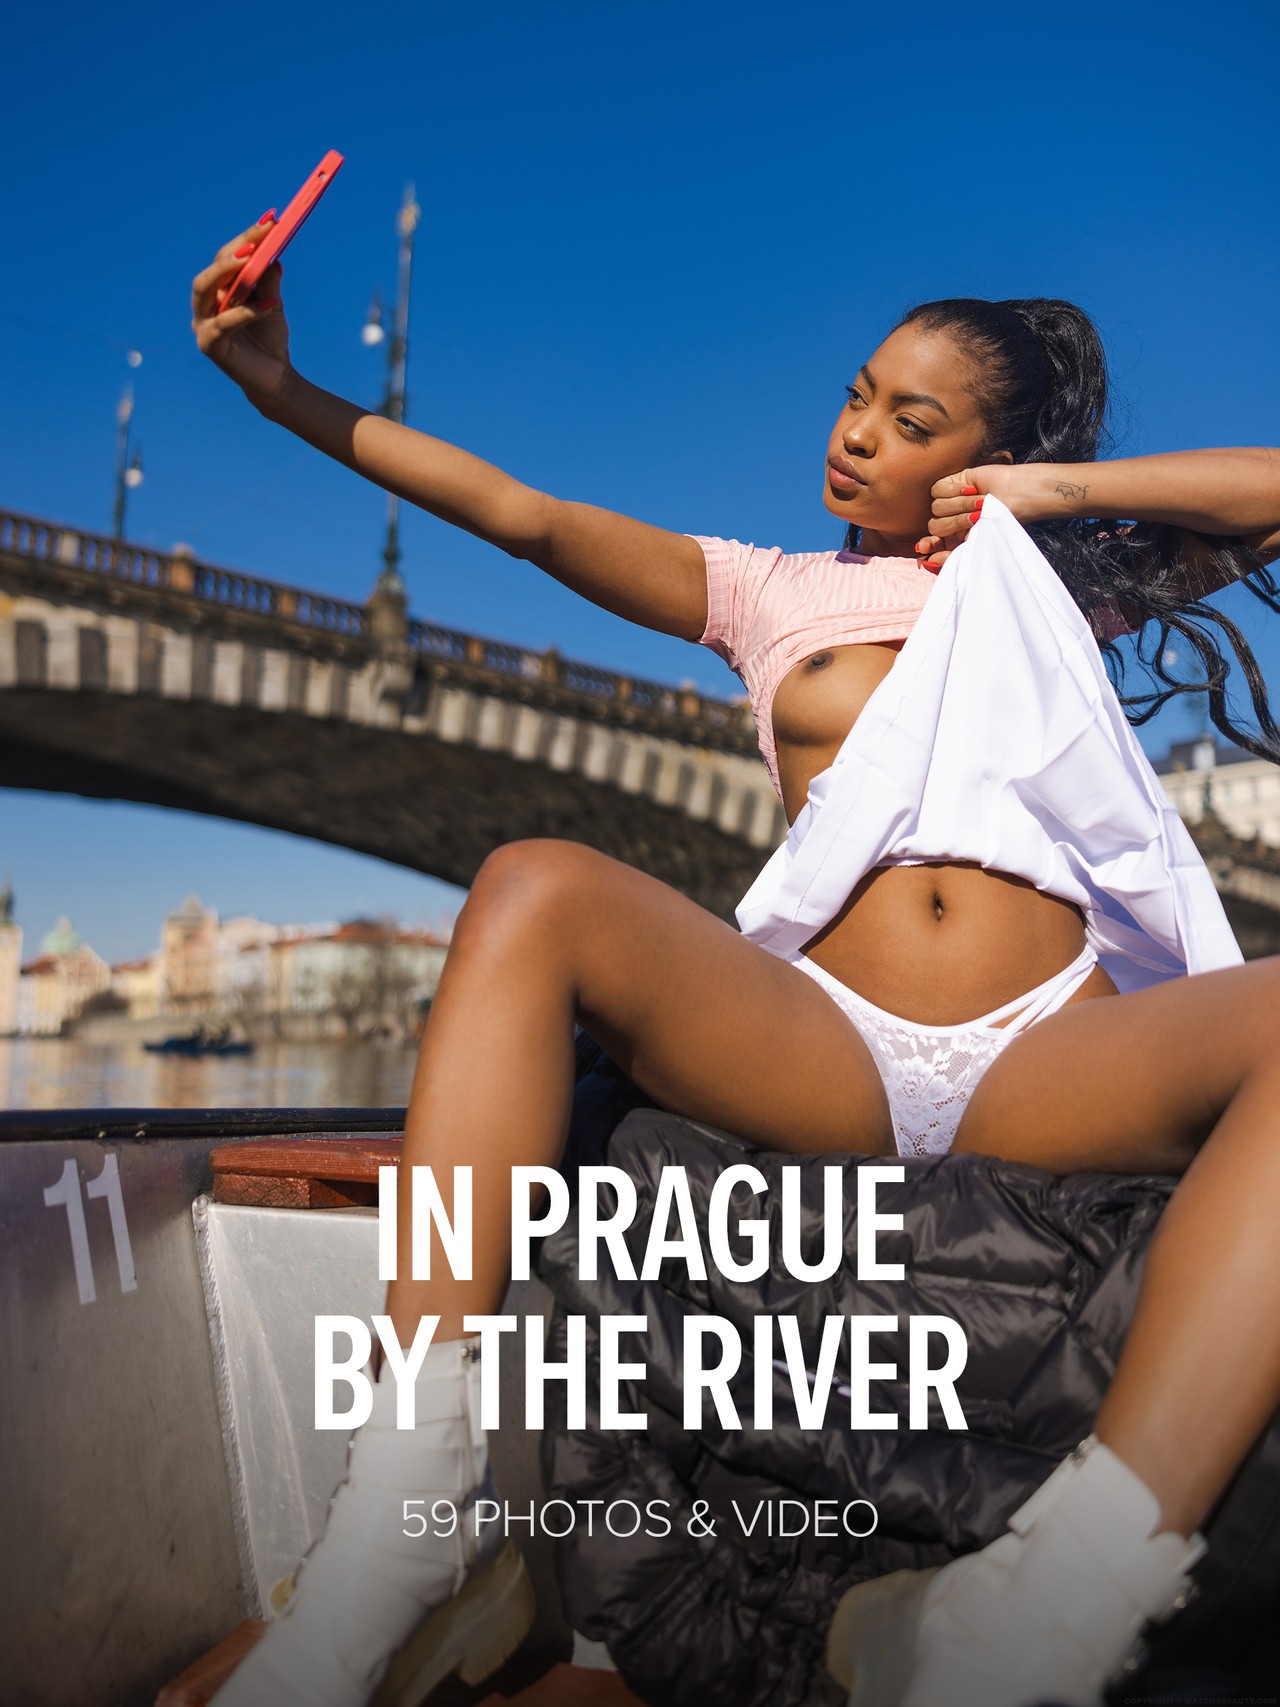 We bring you more sexy pictures from Sofi Vega’s trip to Prague – a city she really enjoyed visiting. She was walking along the river bank, riding on boats, licking ice creams provocatively and all the time she was receiving lots of attention from men passing by her. We are very happy that she is going to visit us very soon again.